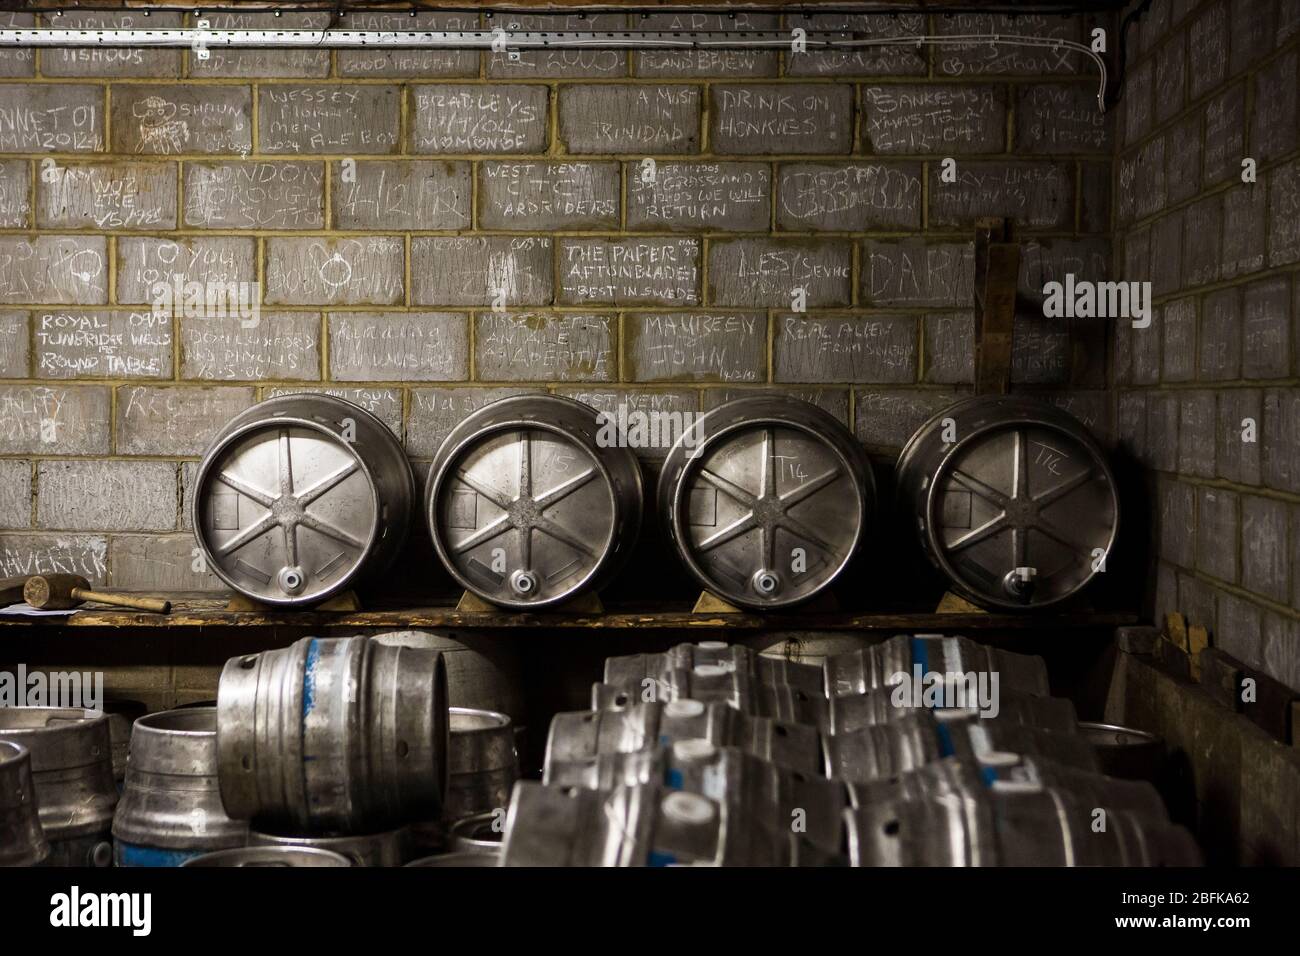 Cold room full of beer at Larkins Brewery award winning brewery and hop farm in Chiddingstone, Kent, UK Stock Photo